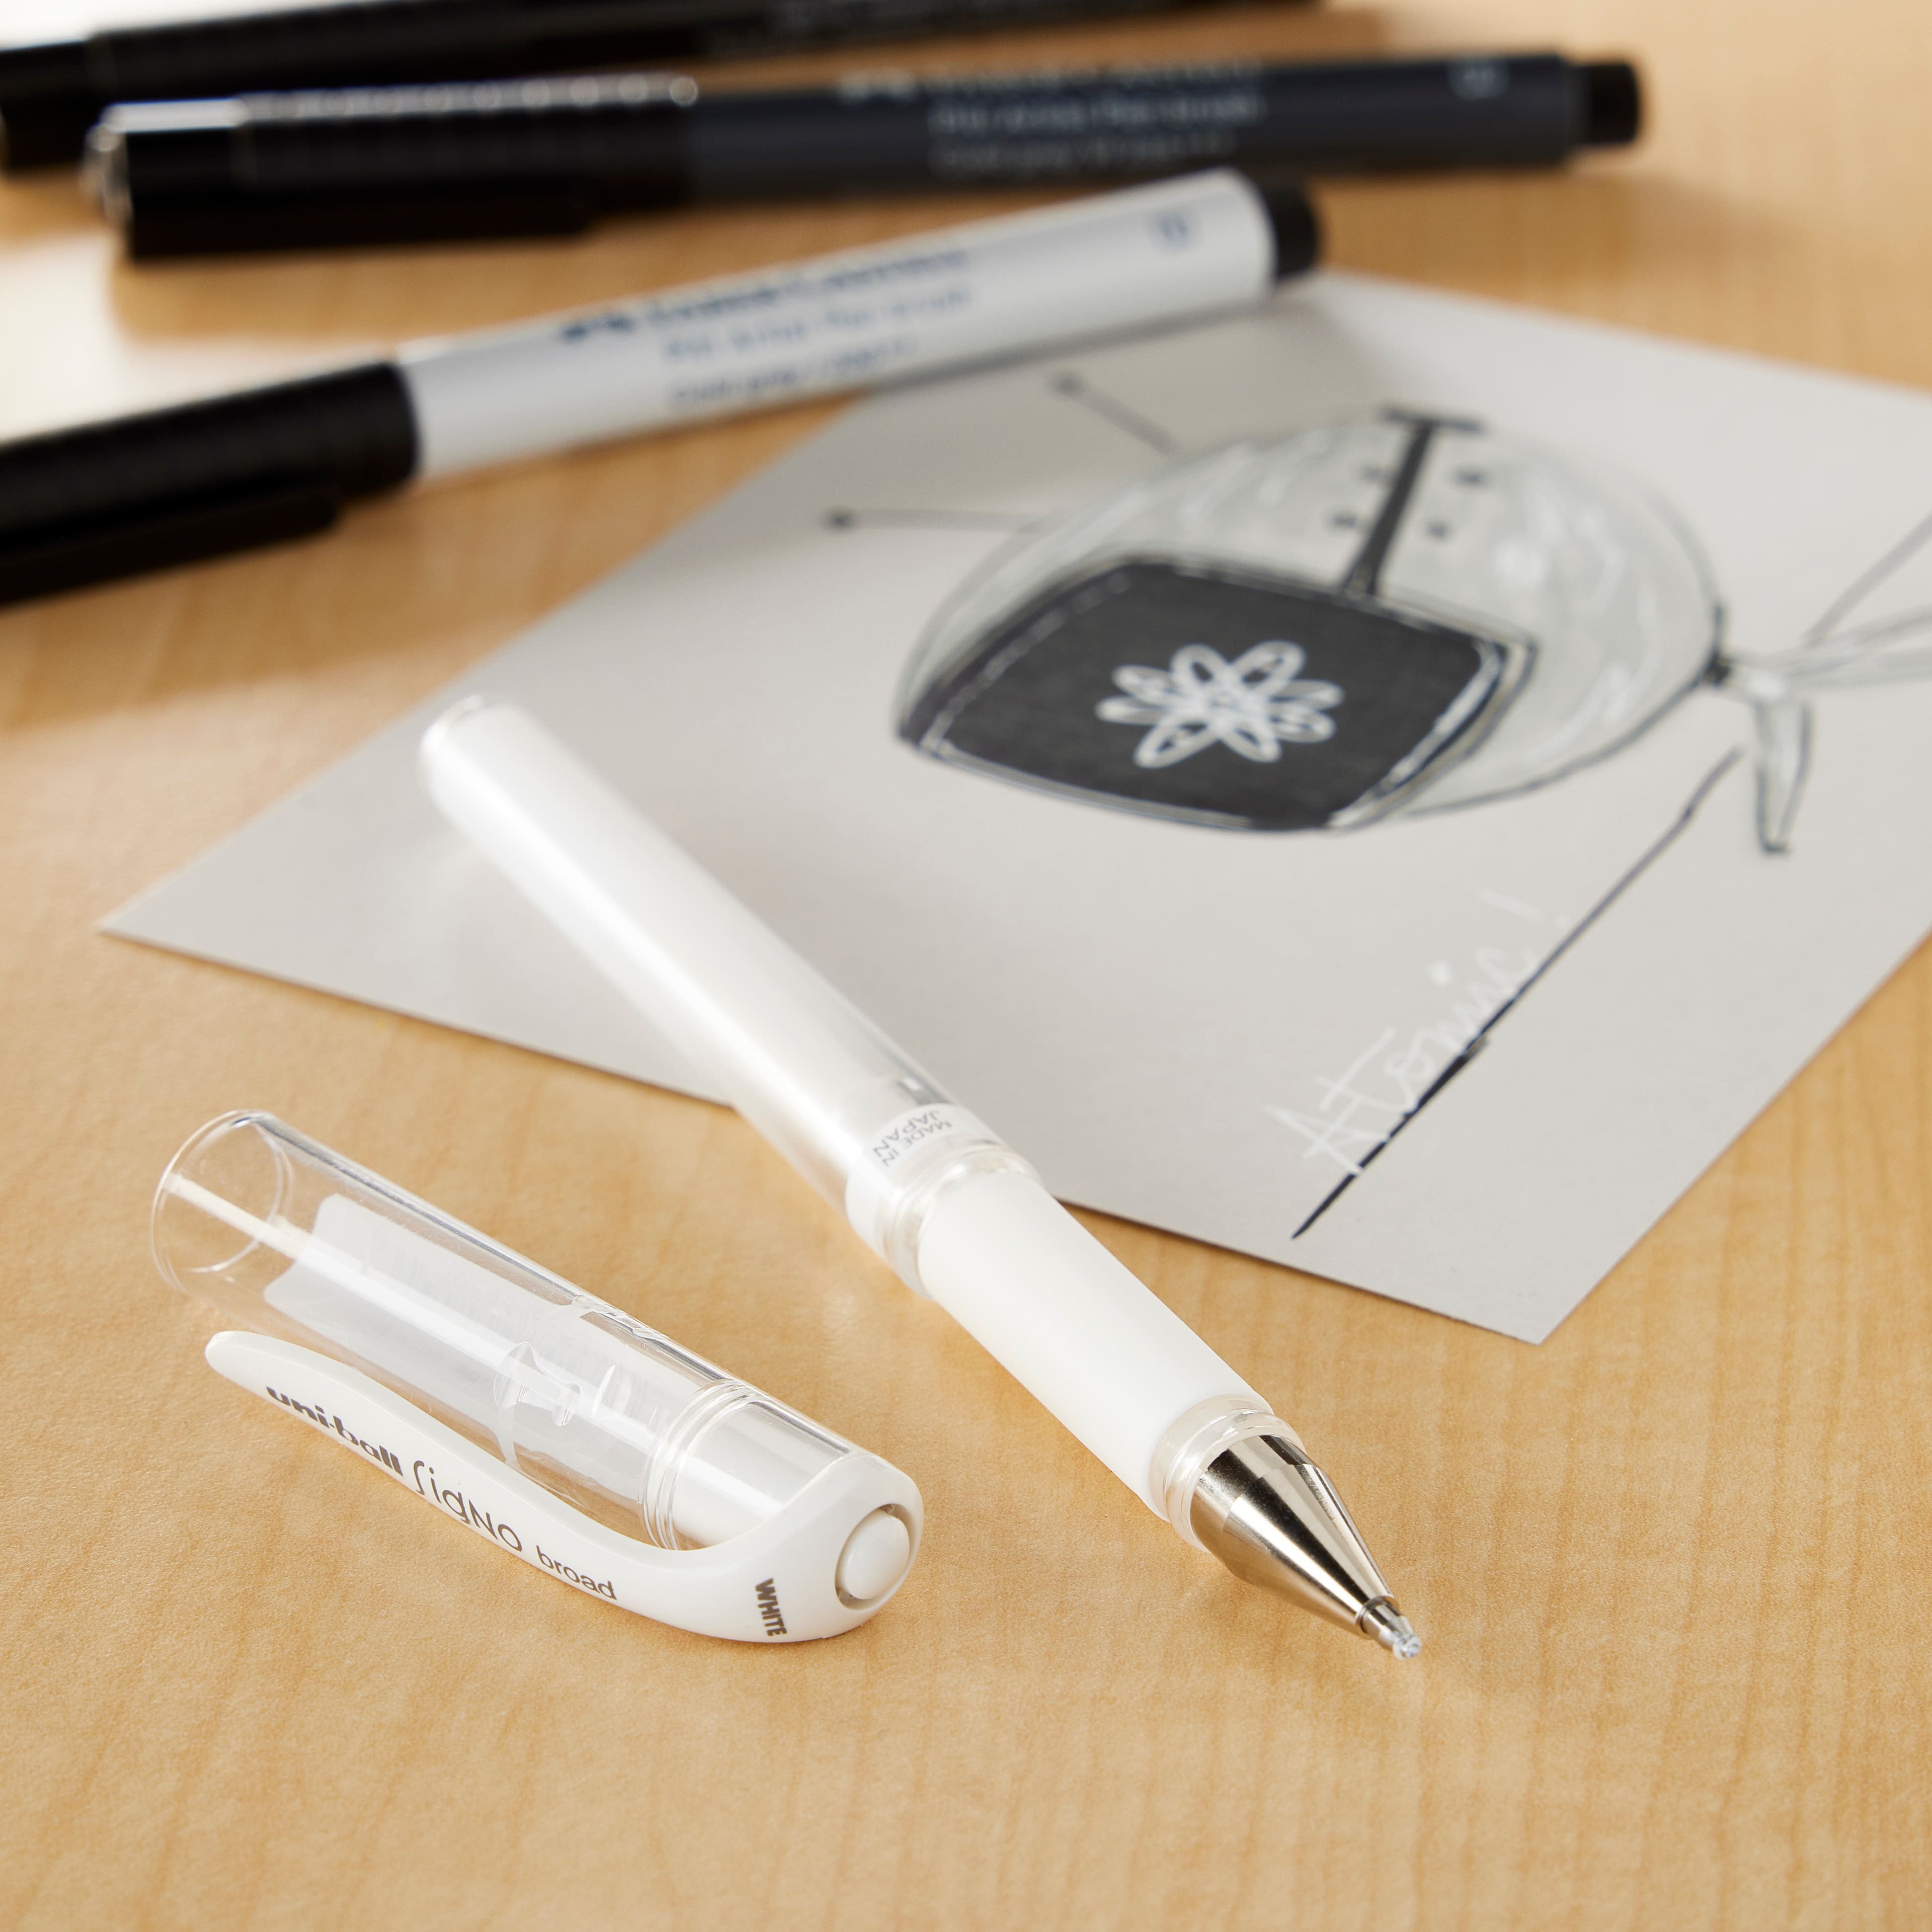 Shop Uniball Signo White Gel Pen with great discounts and prices